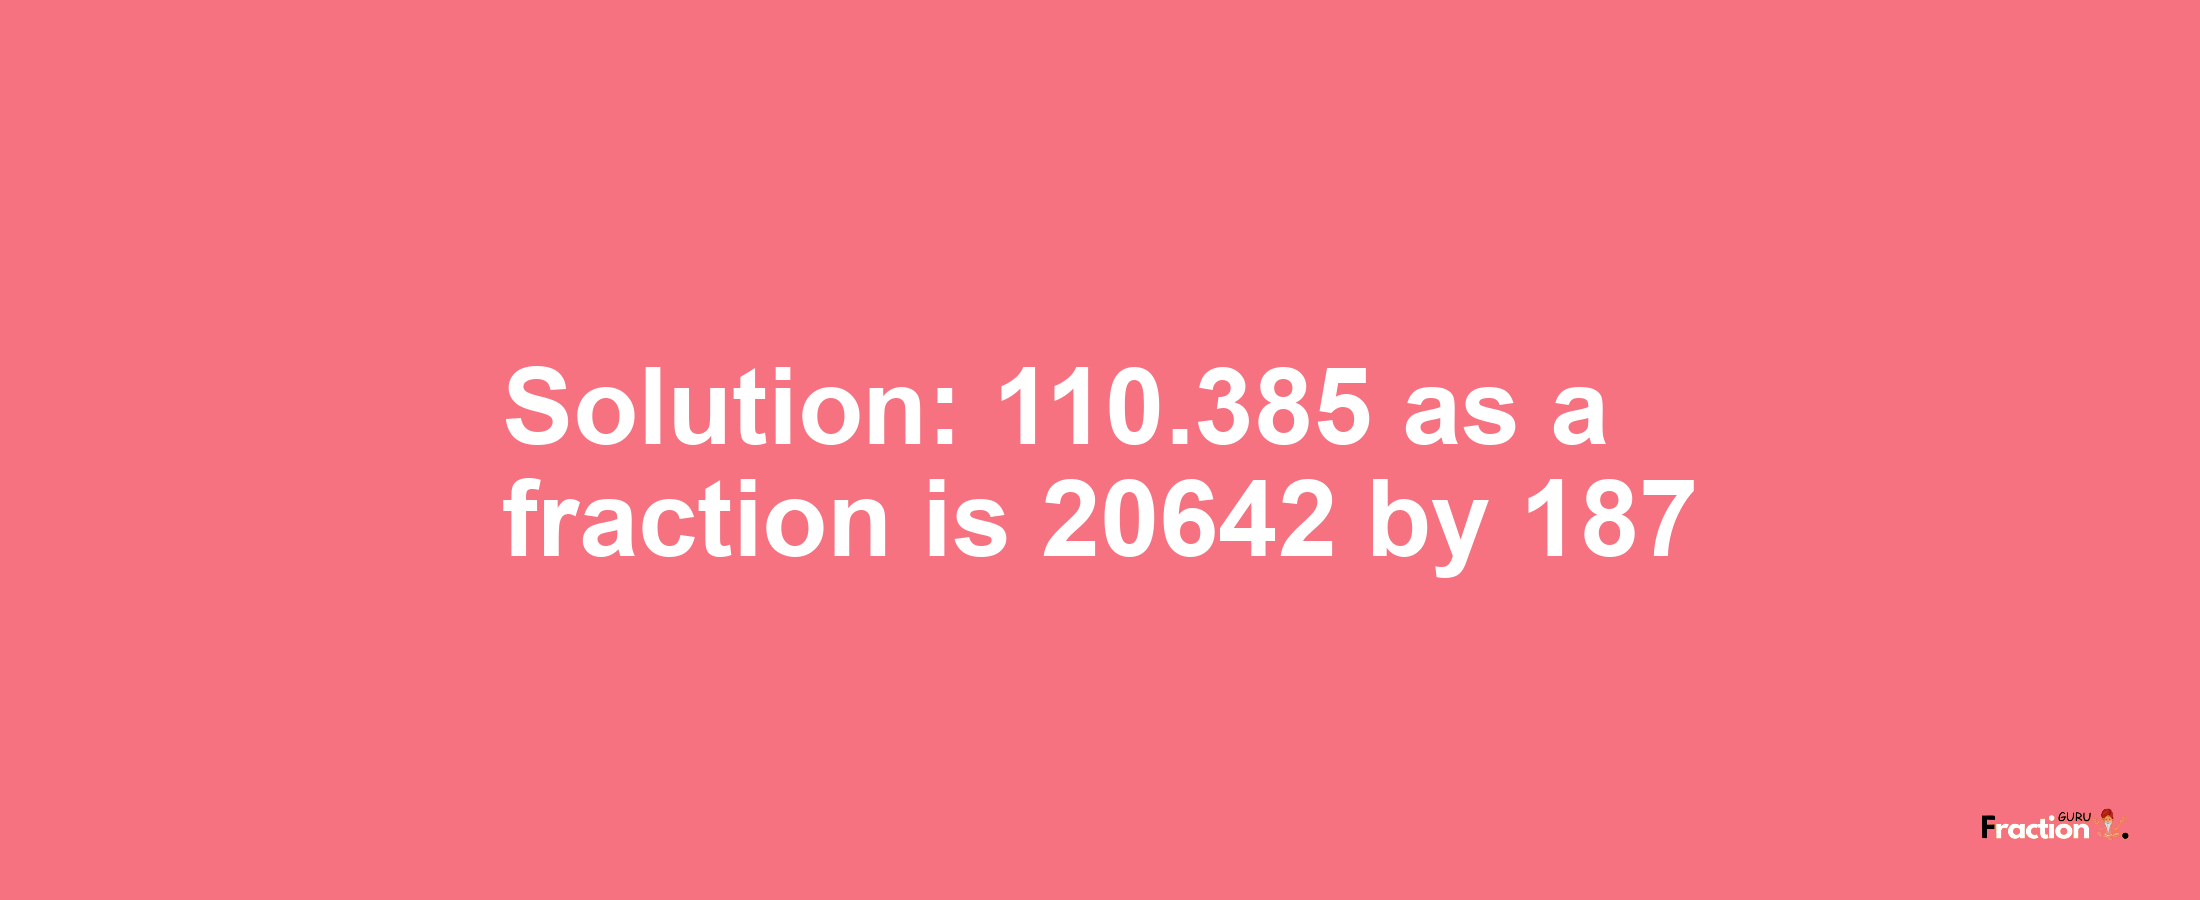 Solution:110.385 as a fraction is 20642/187